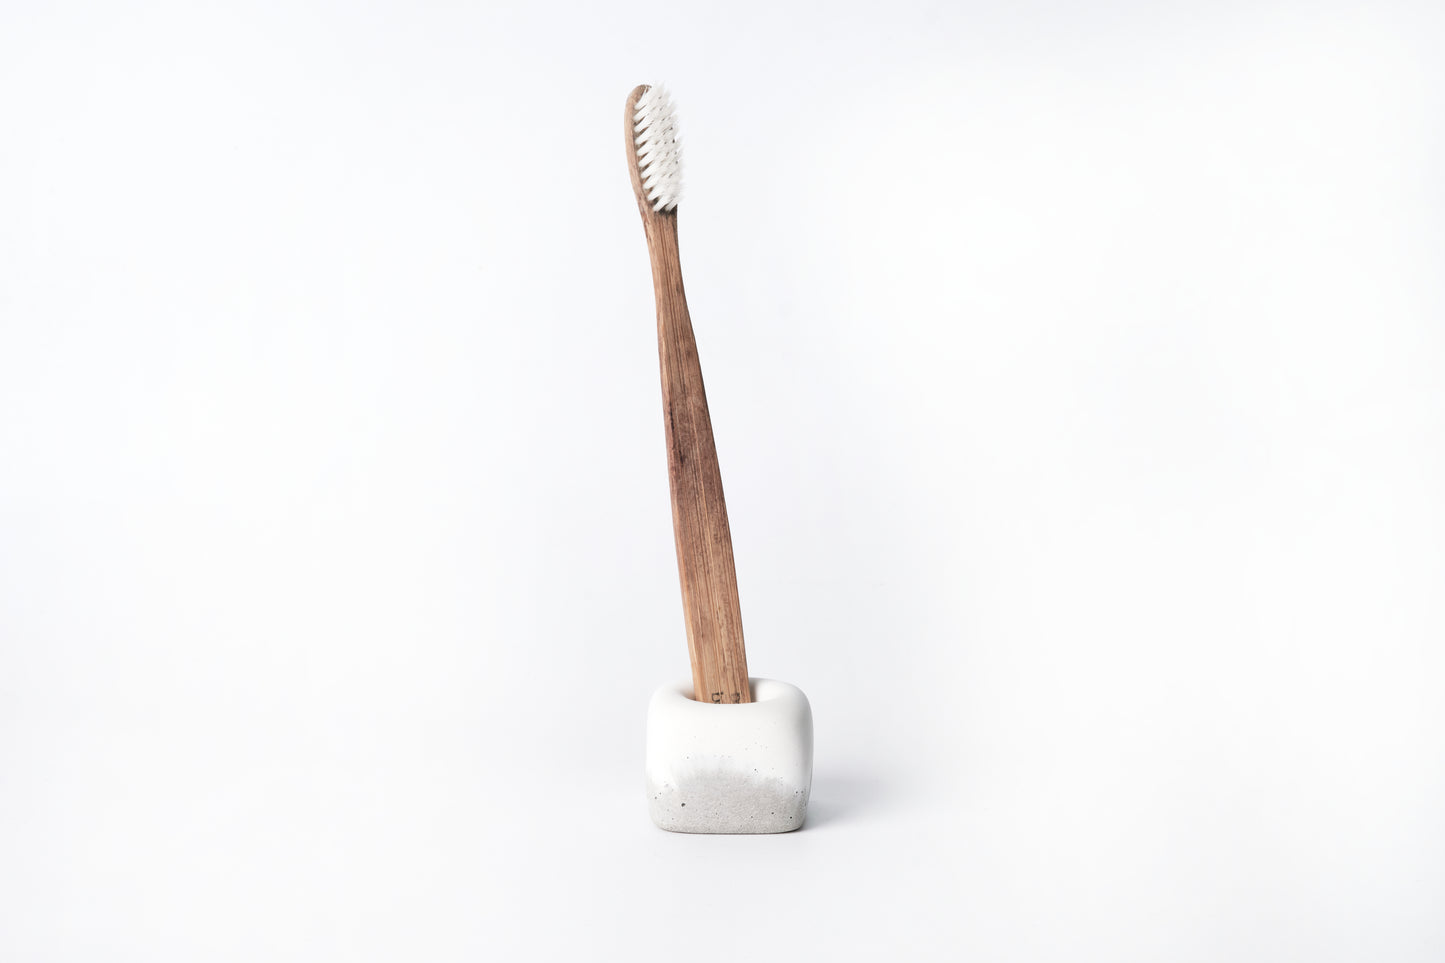 Concrete toothbrush holder - "couple"